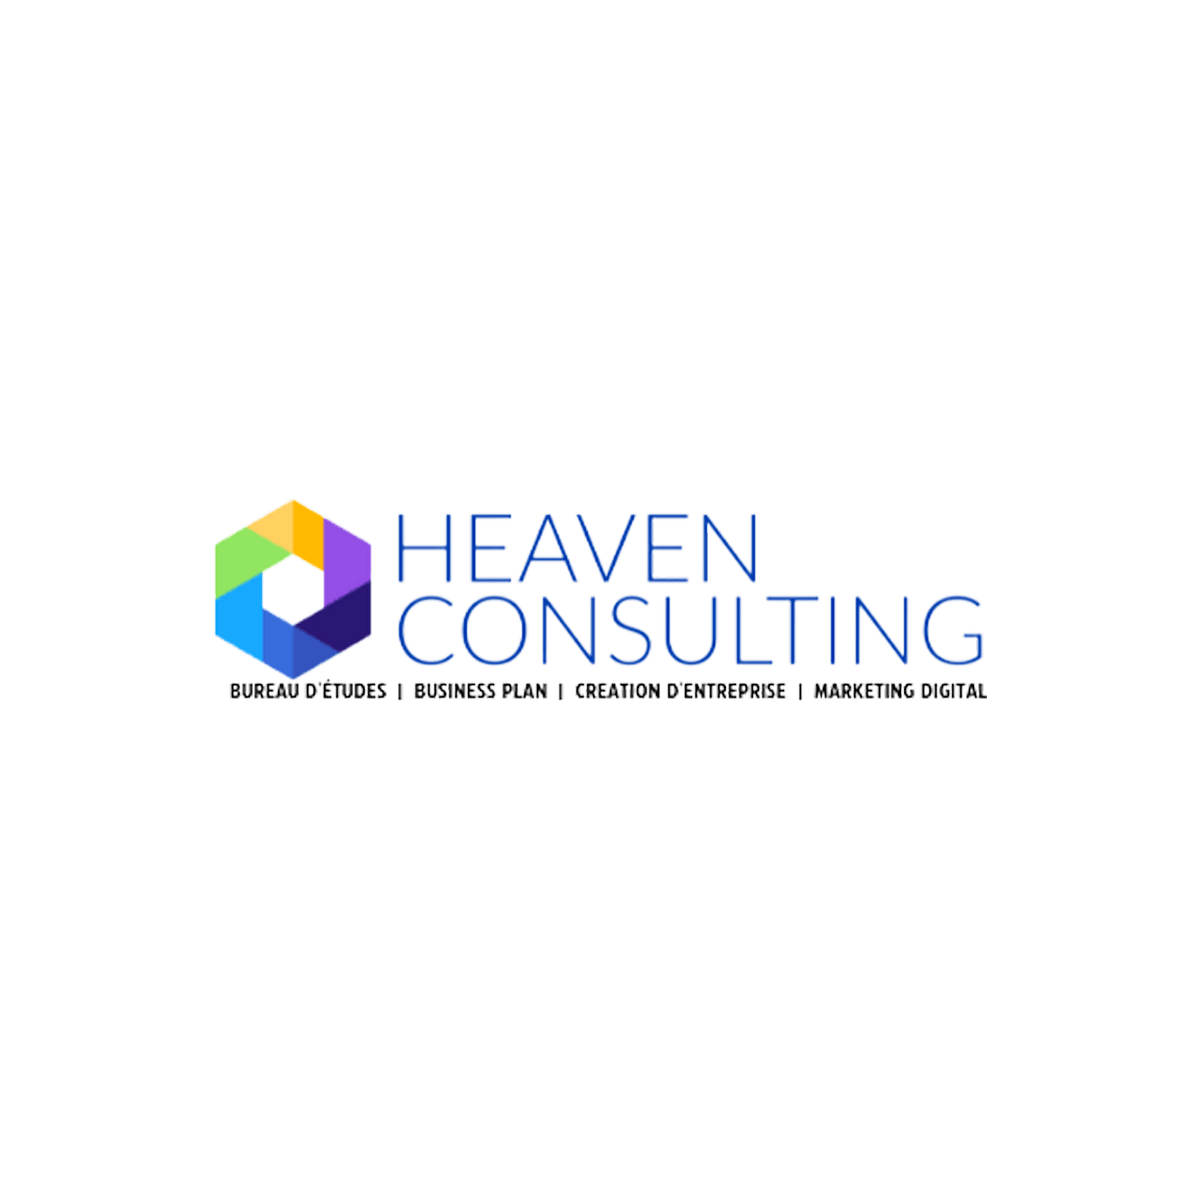 Heaven consulting